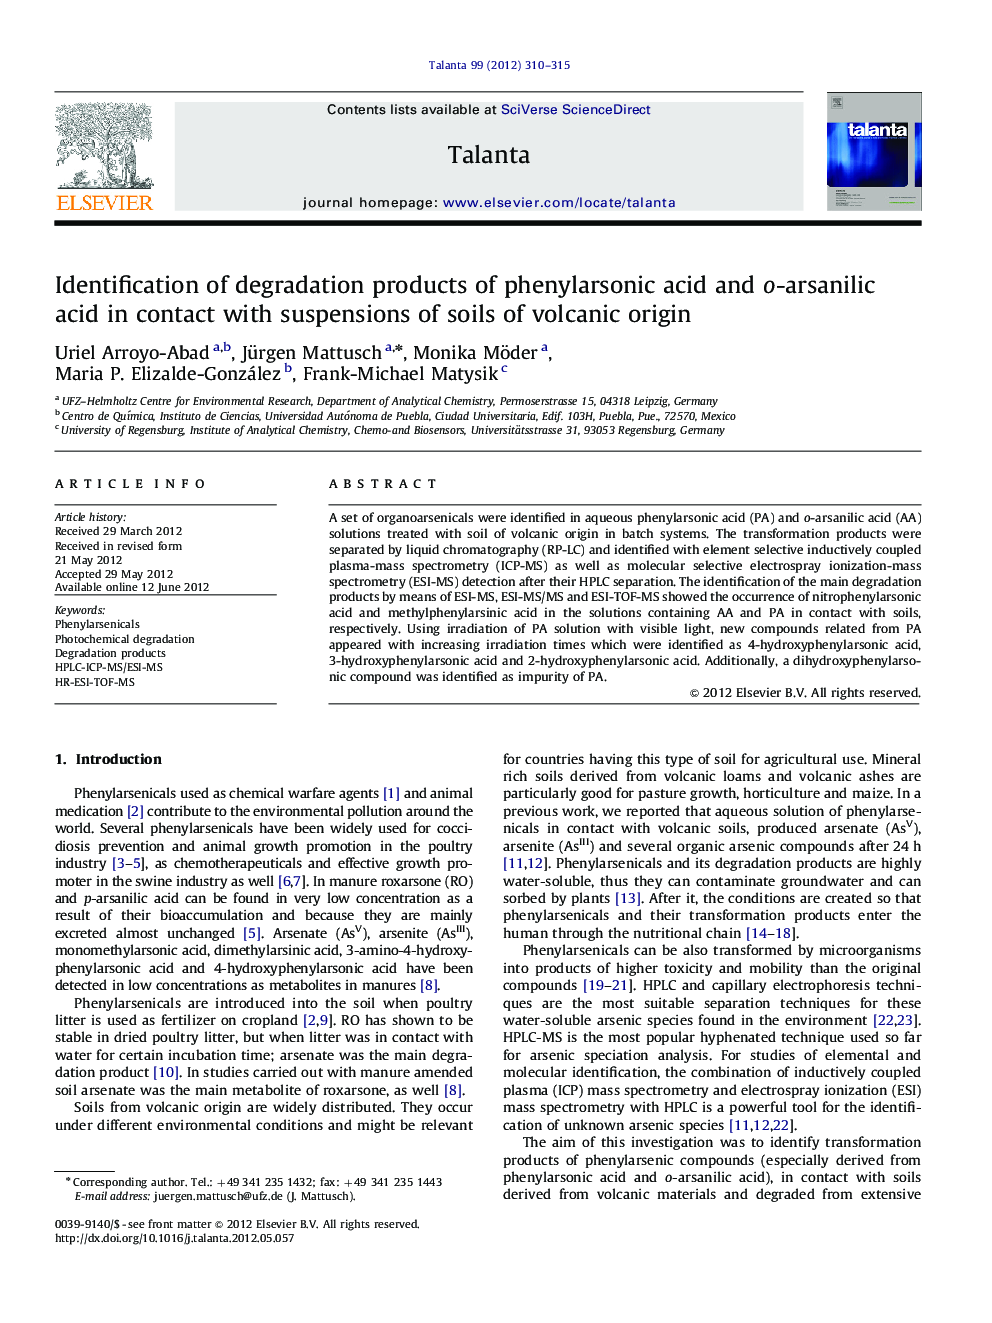 Identification of degradation products of phenylarsonic acid and o-arsanilic acid in contact with suspensions of soils of volcanic origin